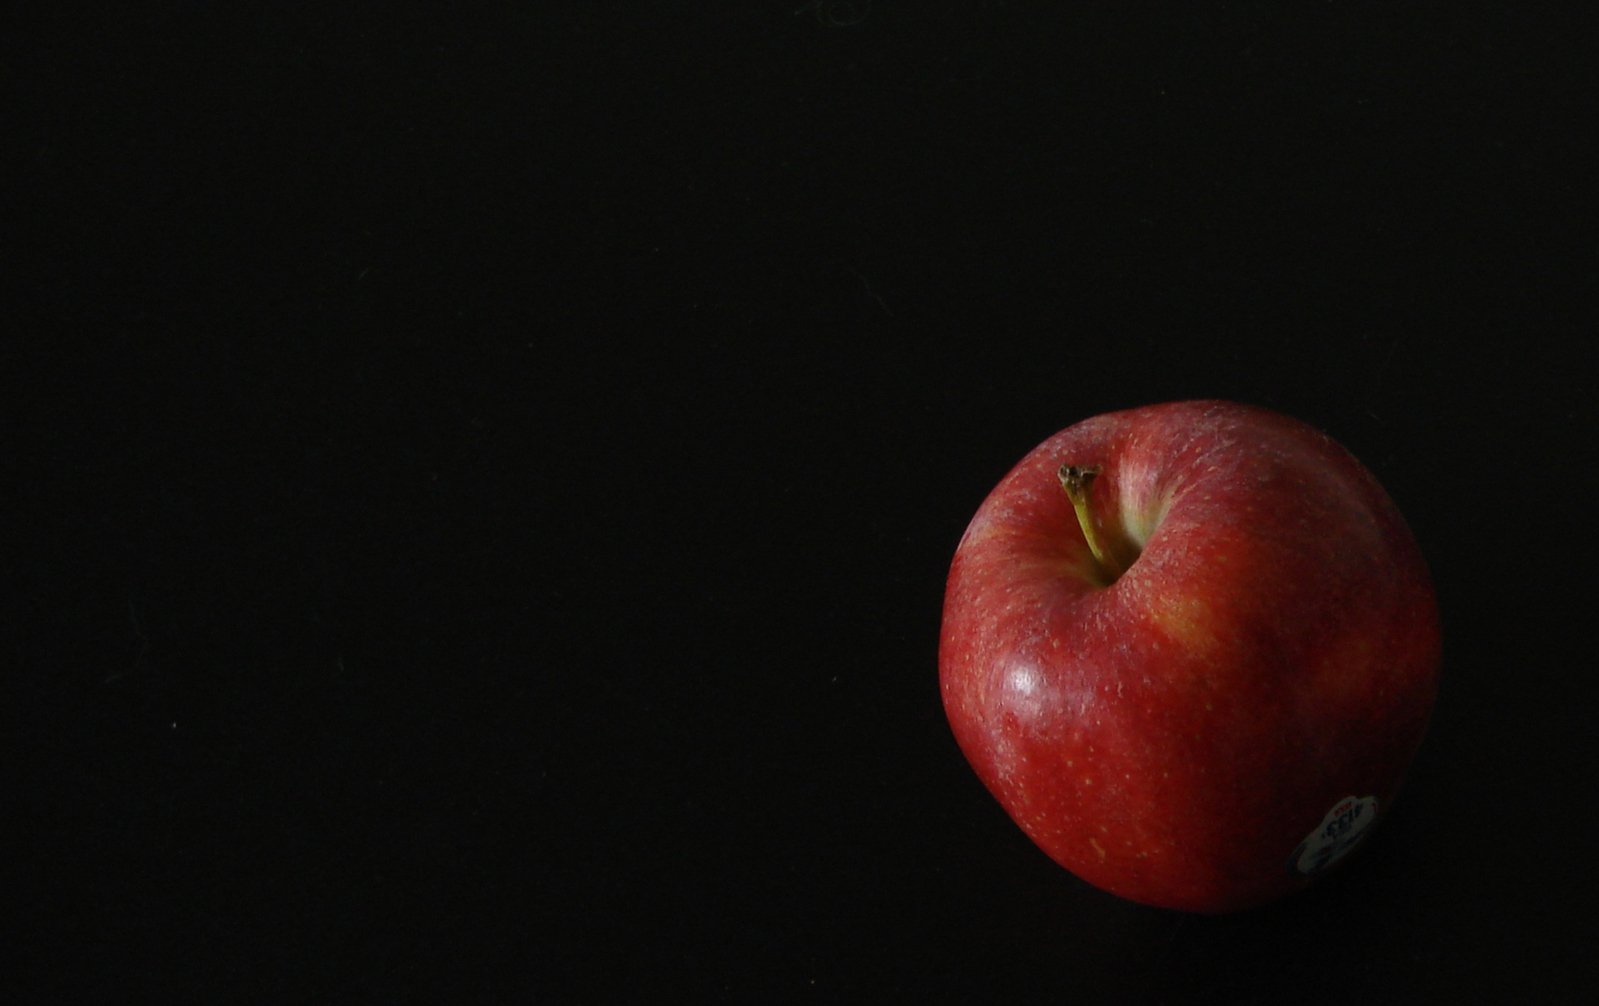 a single apple on a black surface with lighting